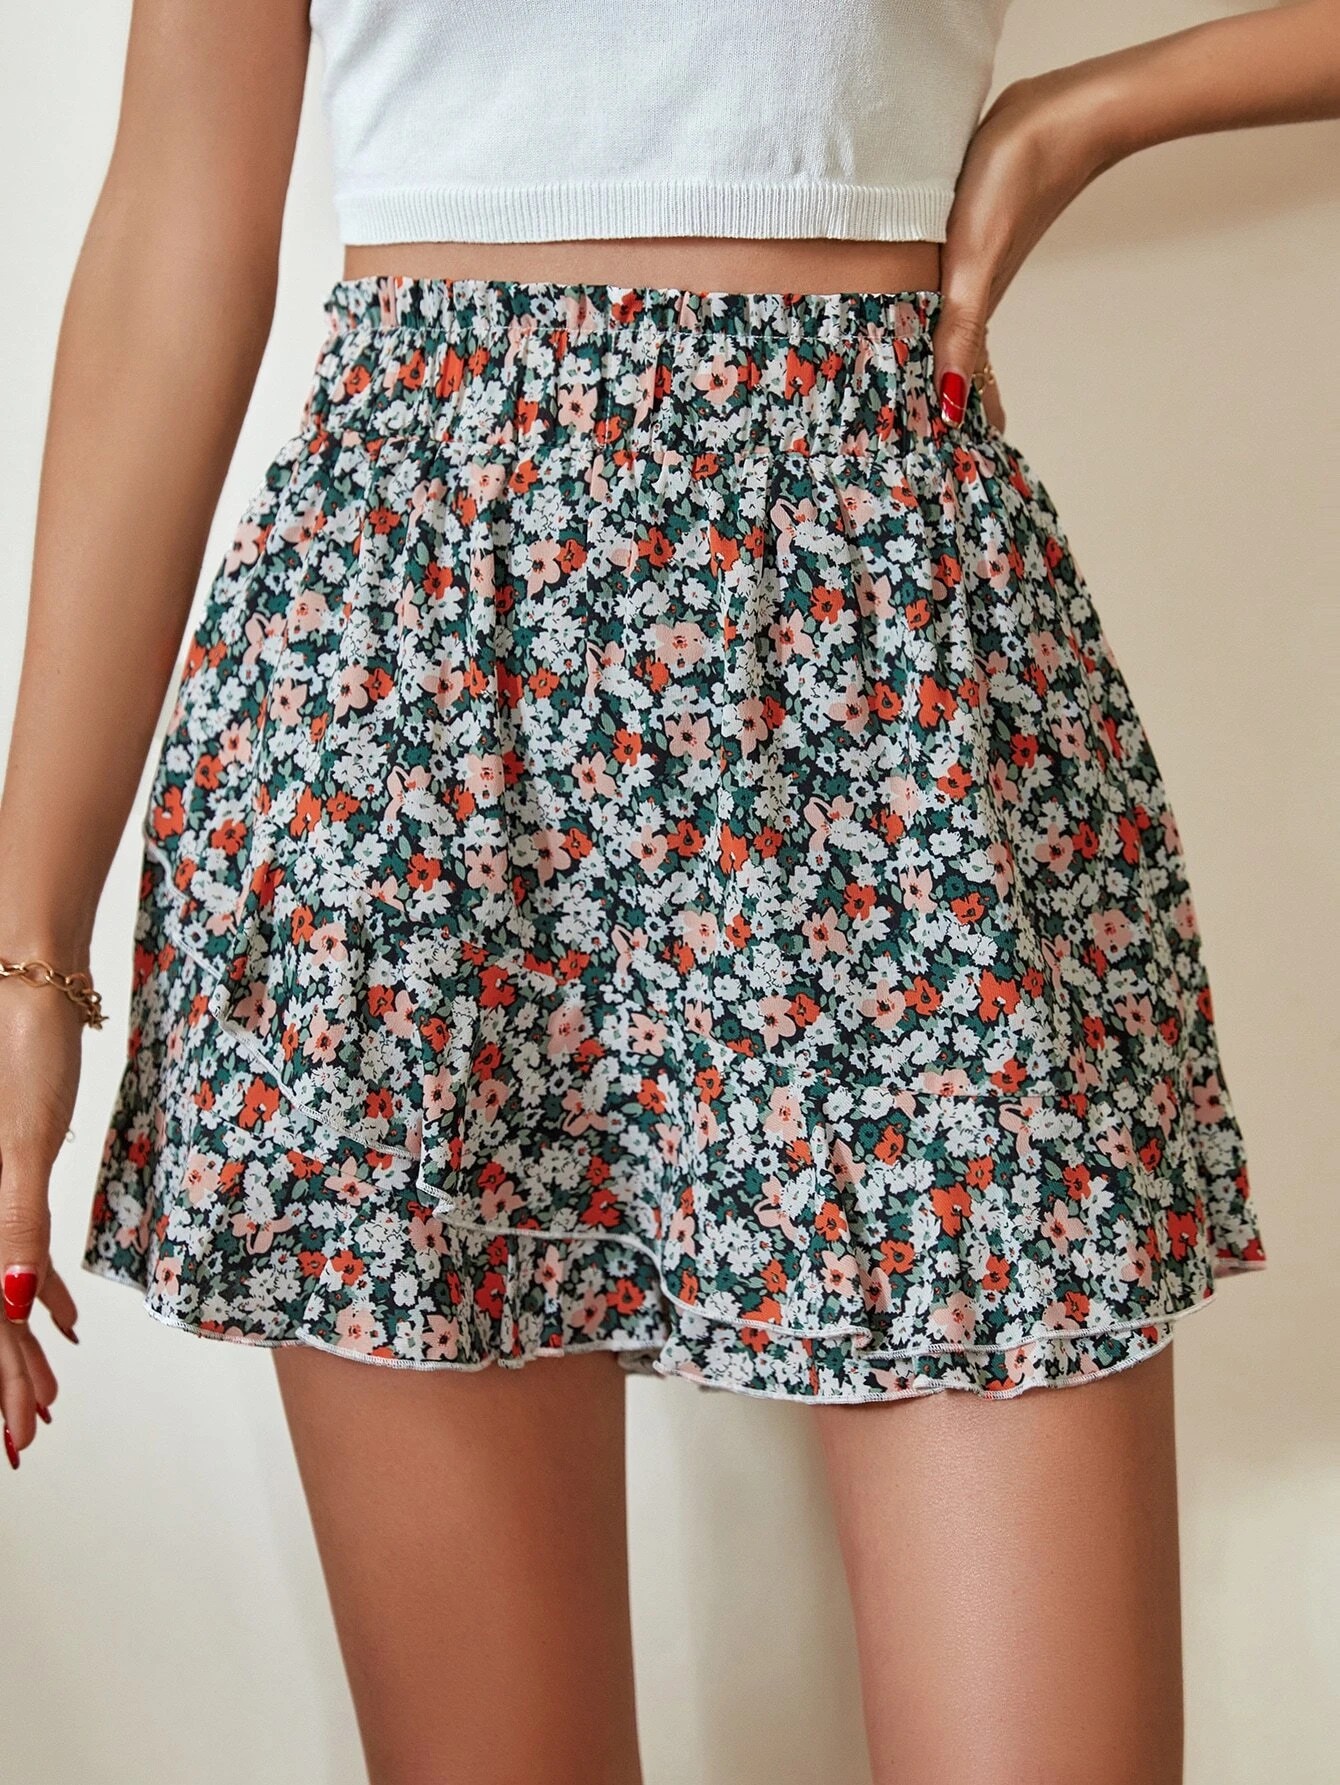 Skort stampa floreale all over con volant